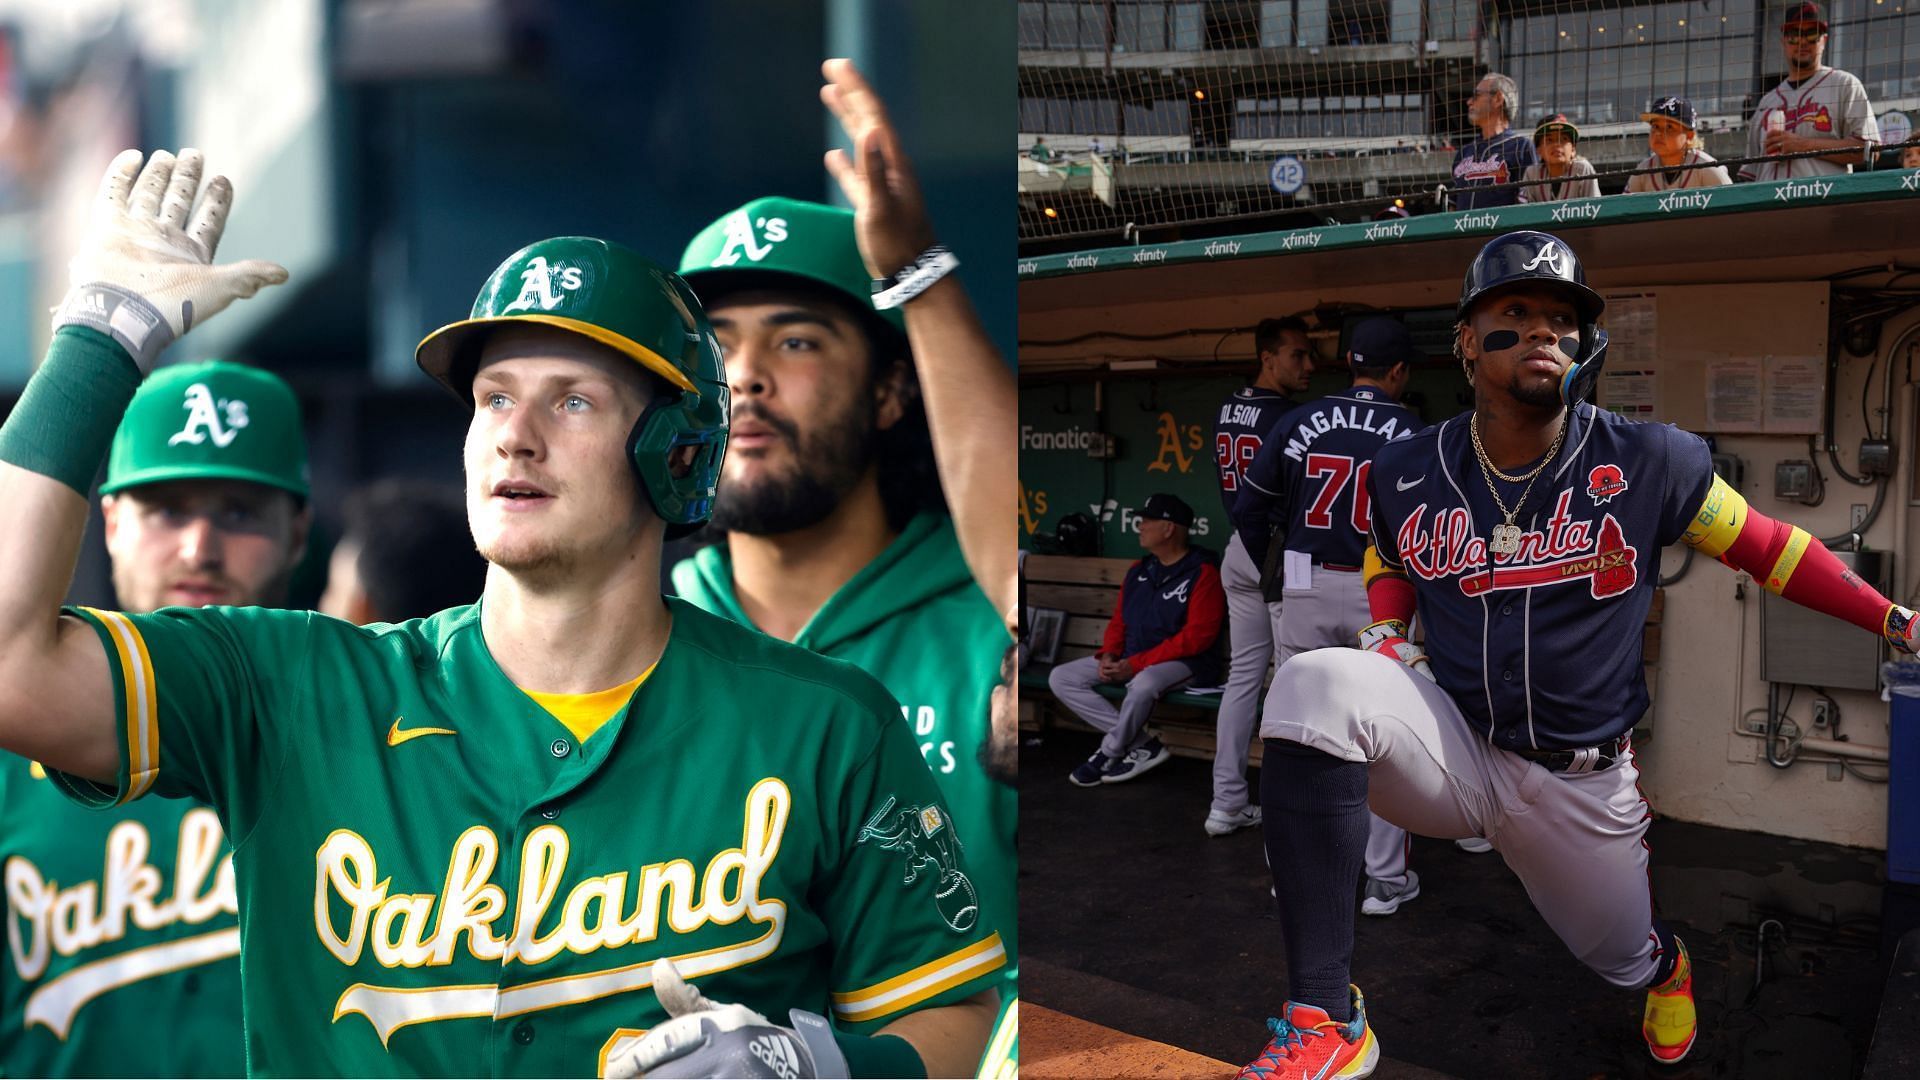 The Oakland Athletics pulled off a rare win against the star-studded Atlanta Braves